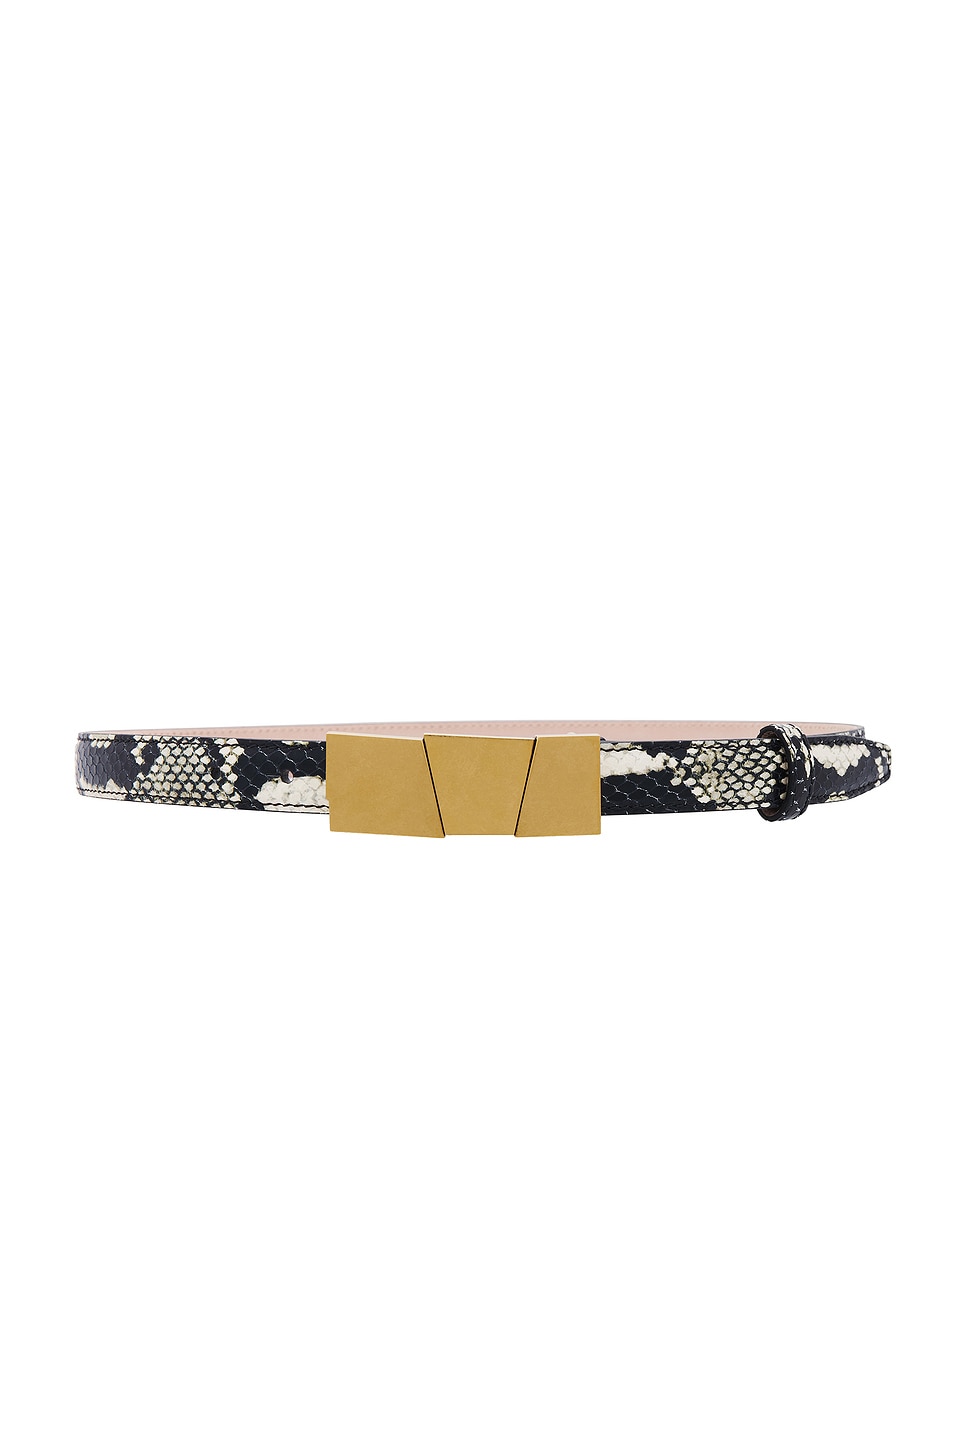 Axel Antique Gold 20mm Belt in Nude